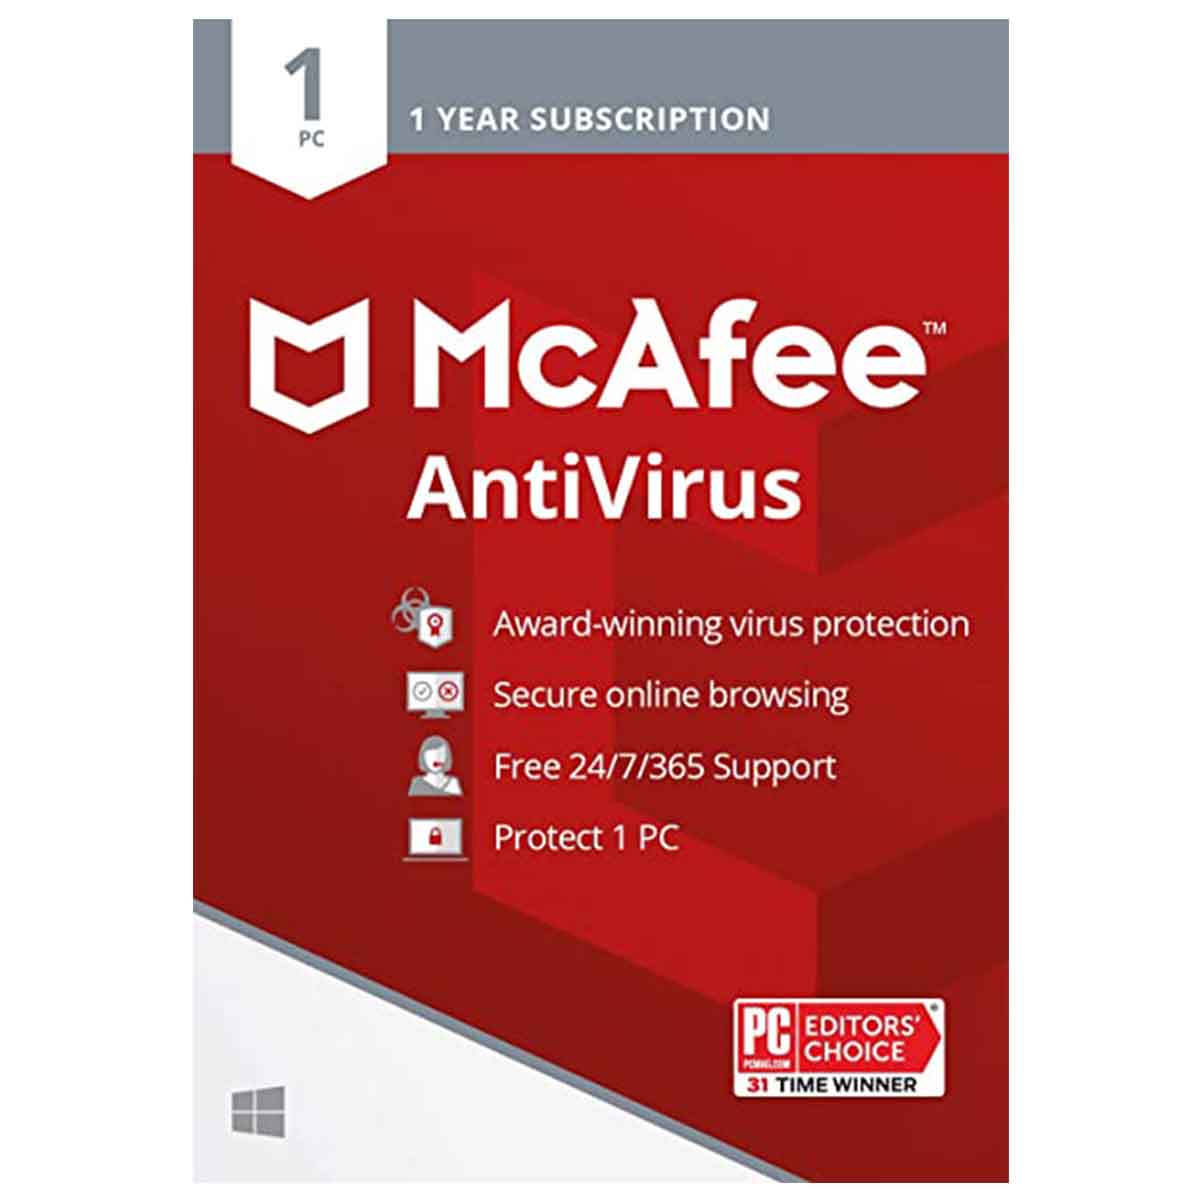 Buy Mcafee Antivirus Full Version with Login and License Key from our Software Store with Discount and Cheap Price on Fastestkey.com.